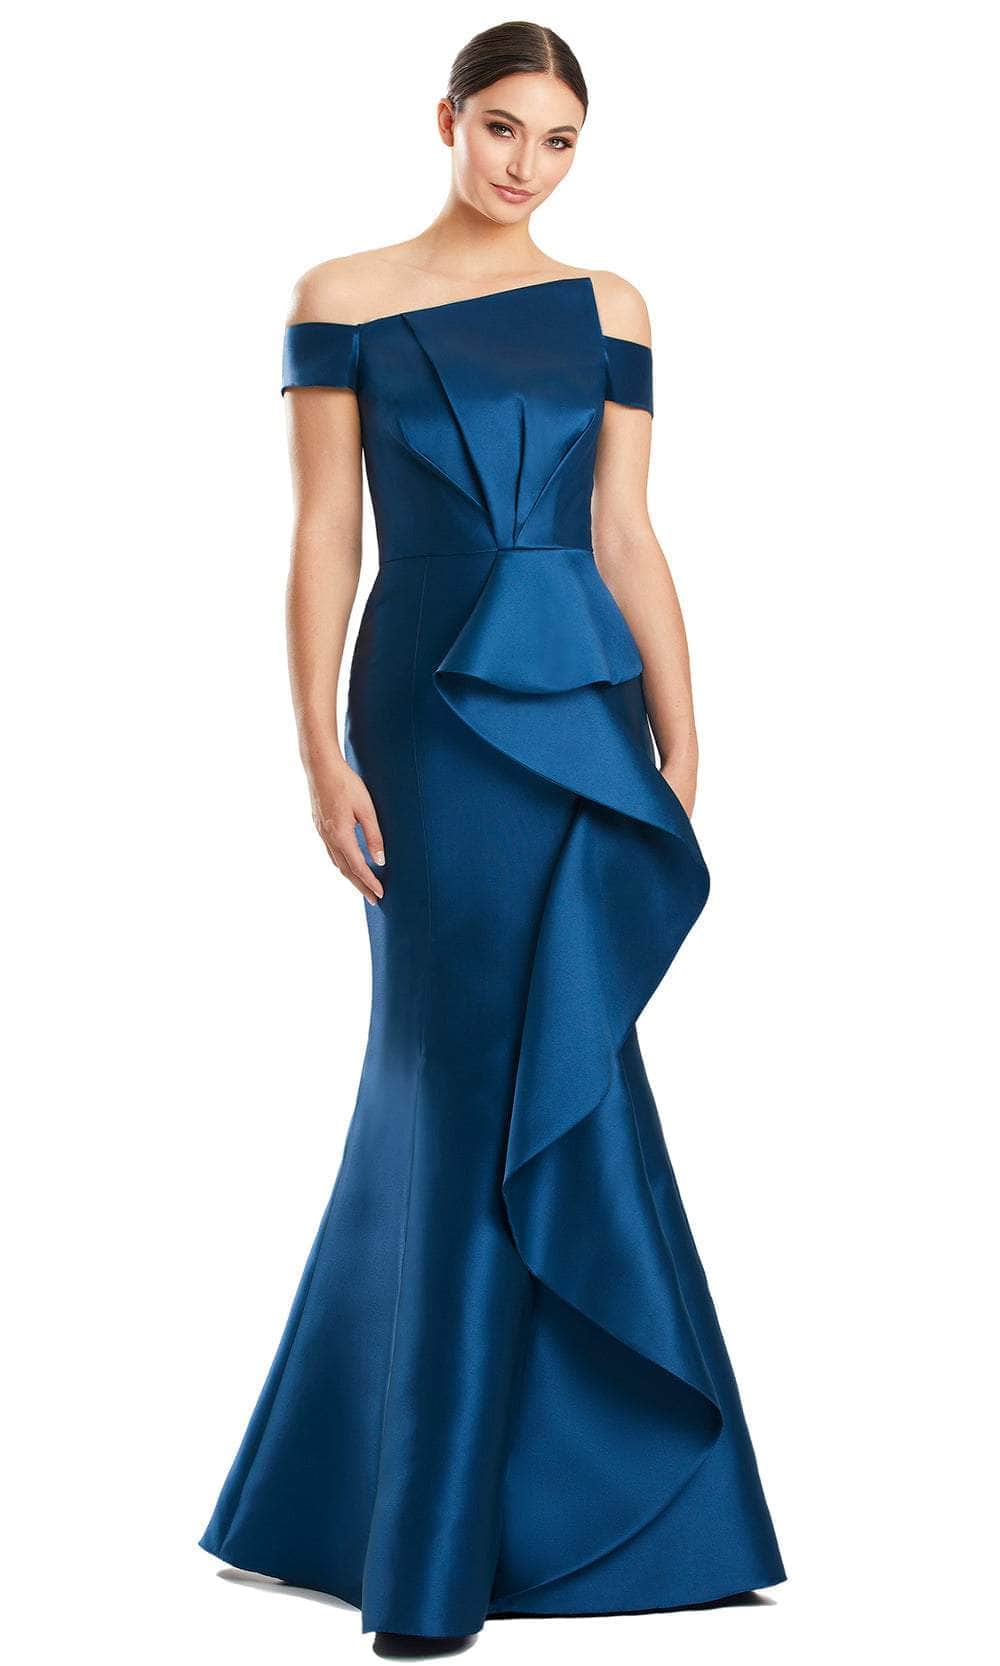 Alexander by Daymor 1873F23 - Off-Shoulder Ruffle Detailed Evening Gown Evening Dresses 18 / Teal Blue